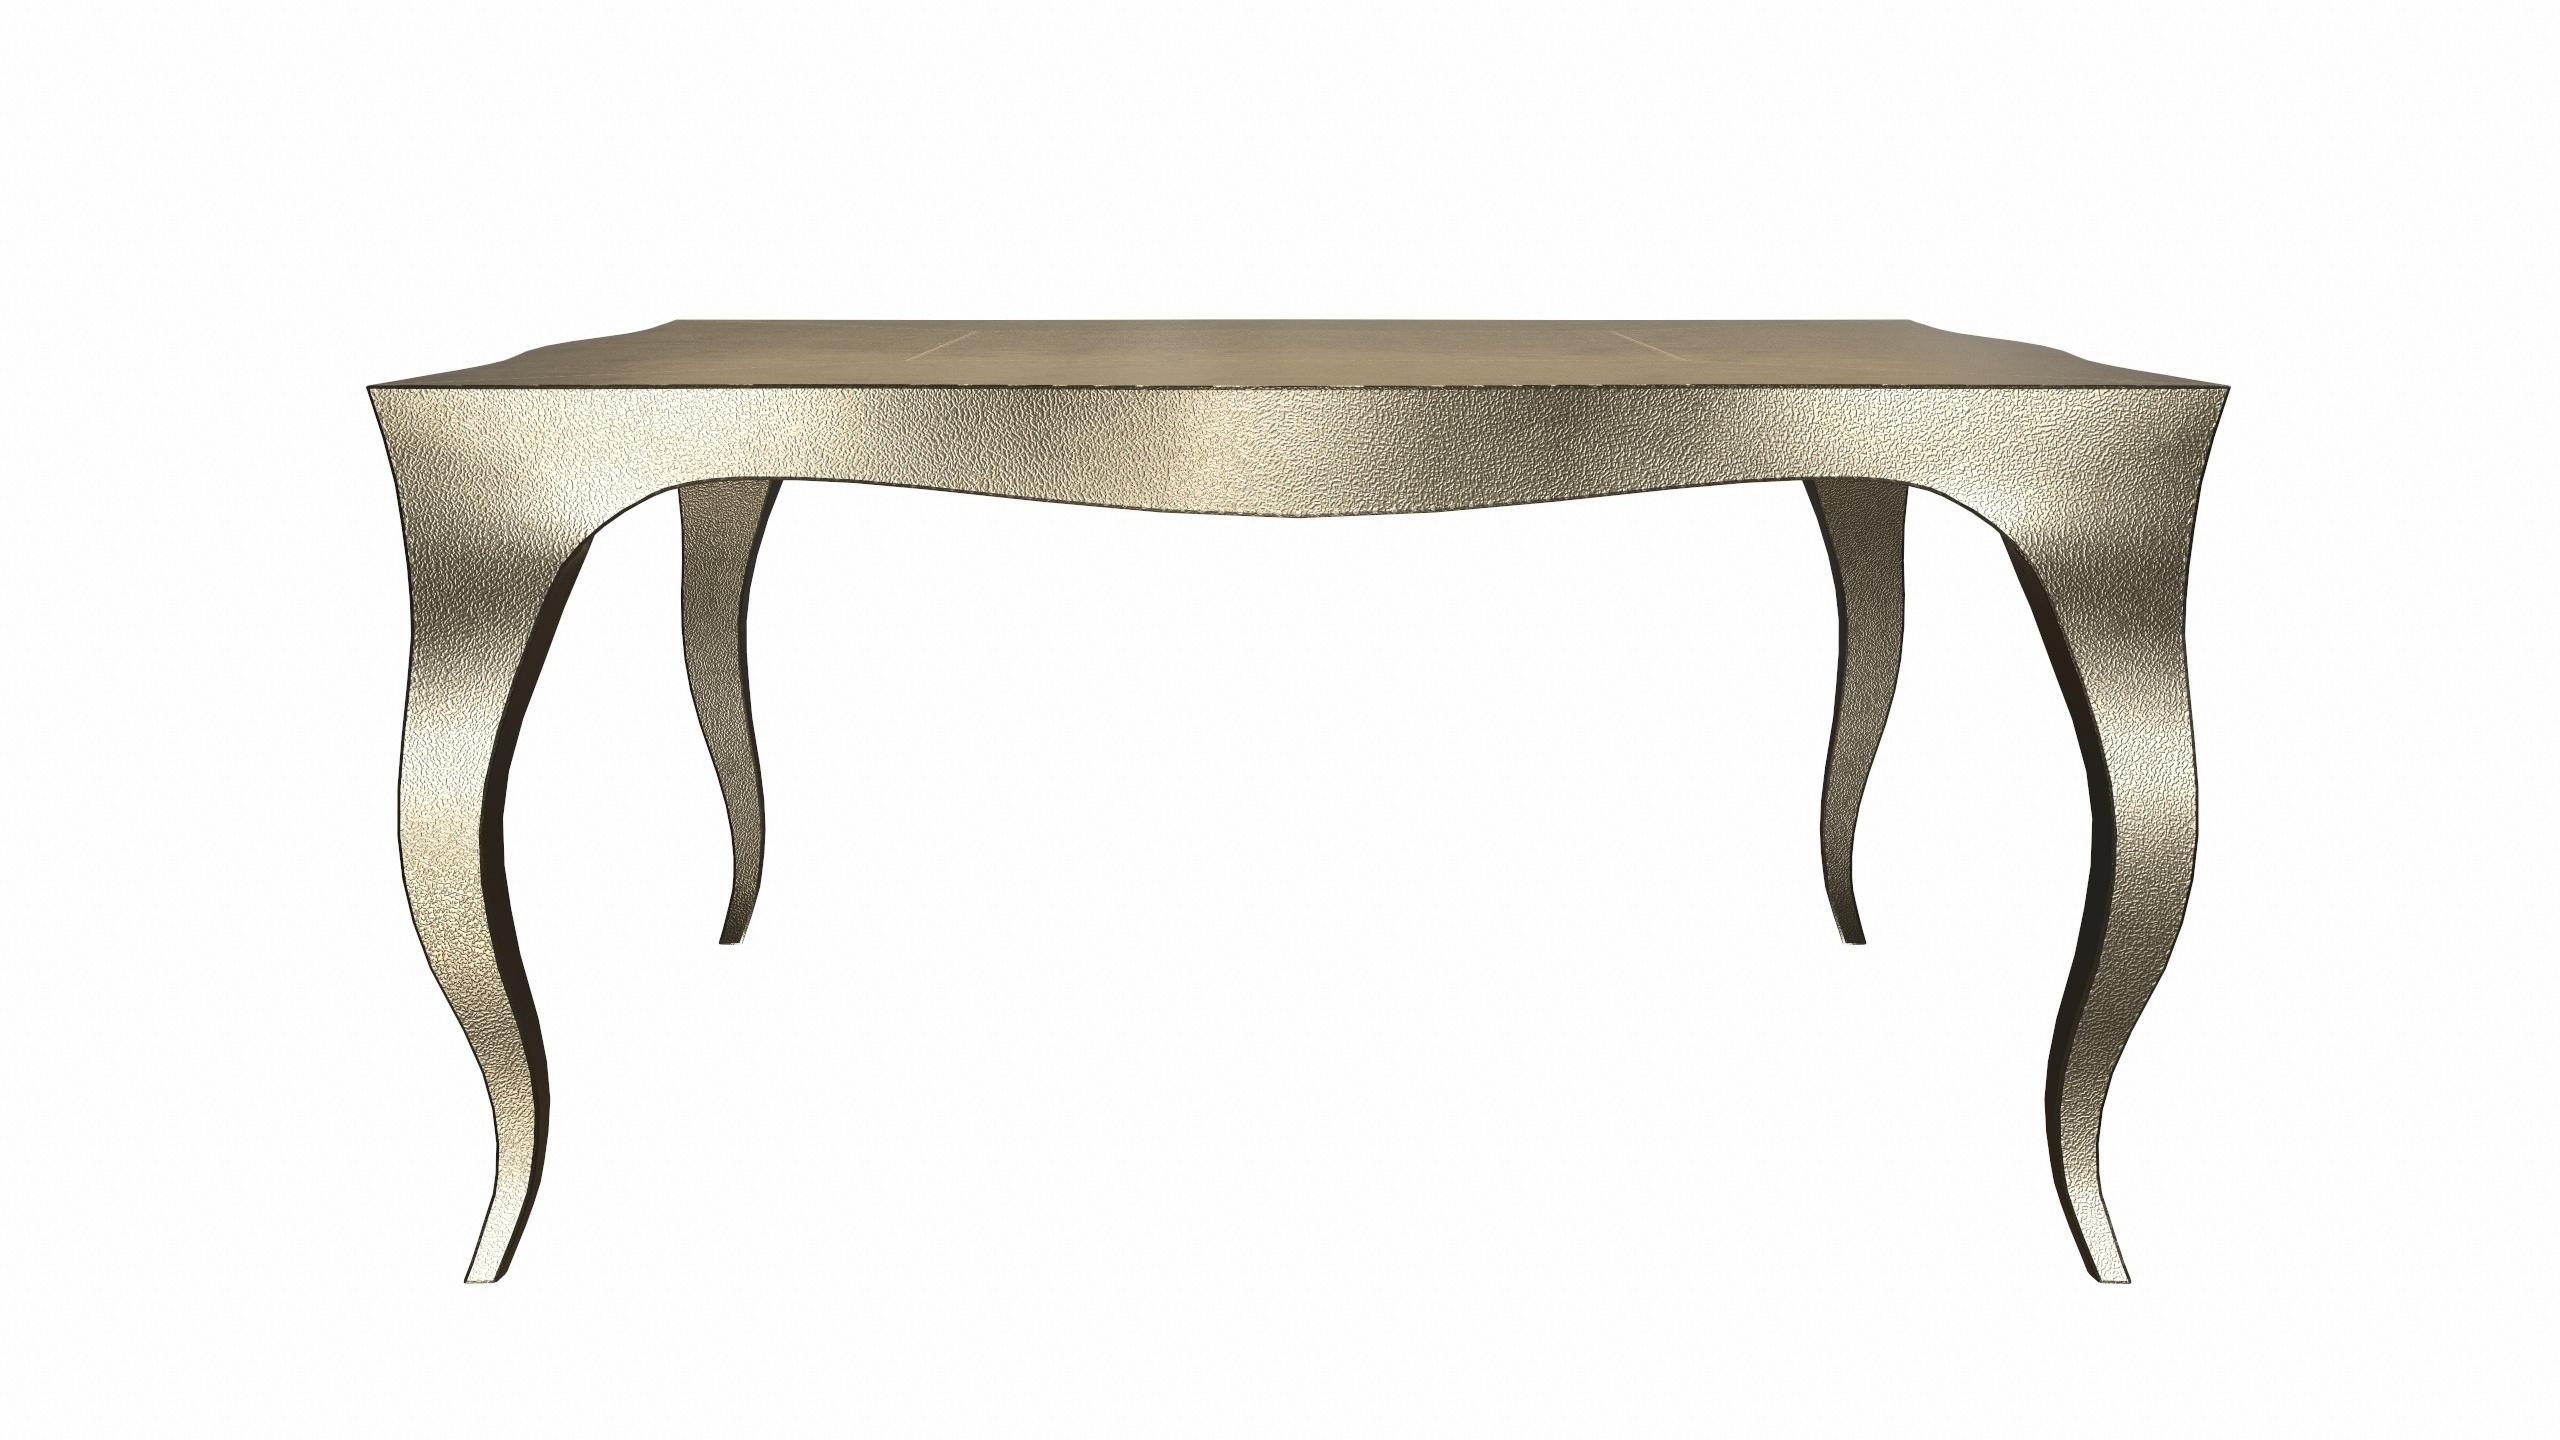 American Louise Art Deco Card Tables and Tea Tables Fine Hammered Brass 18.5x18.5x10 inch For Sale